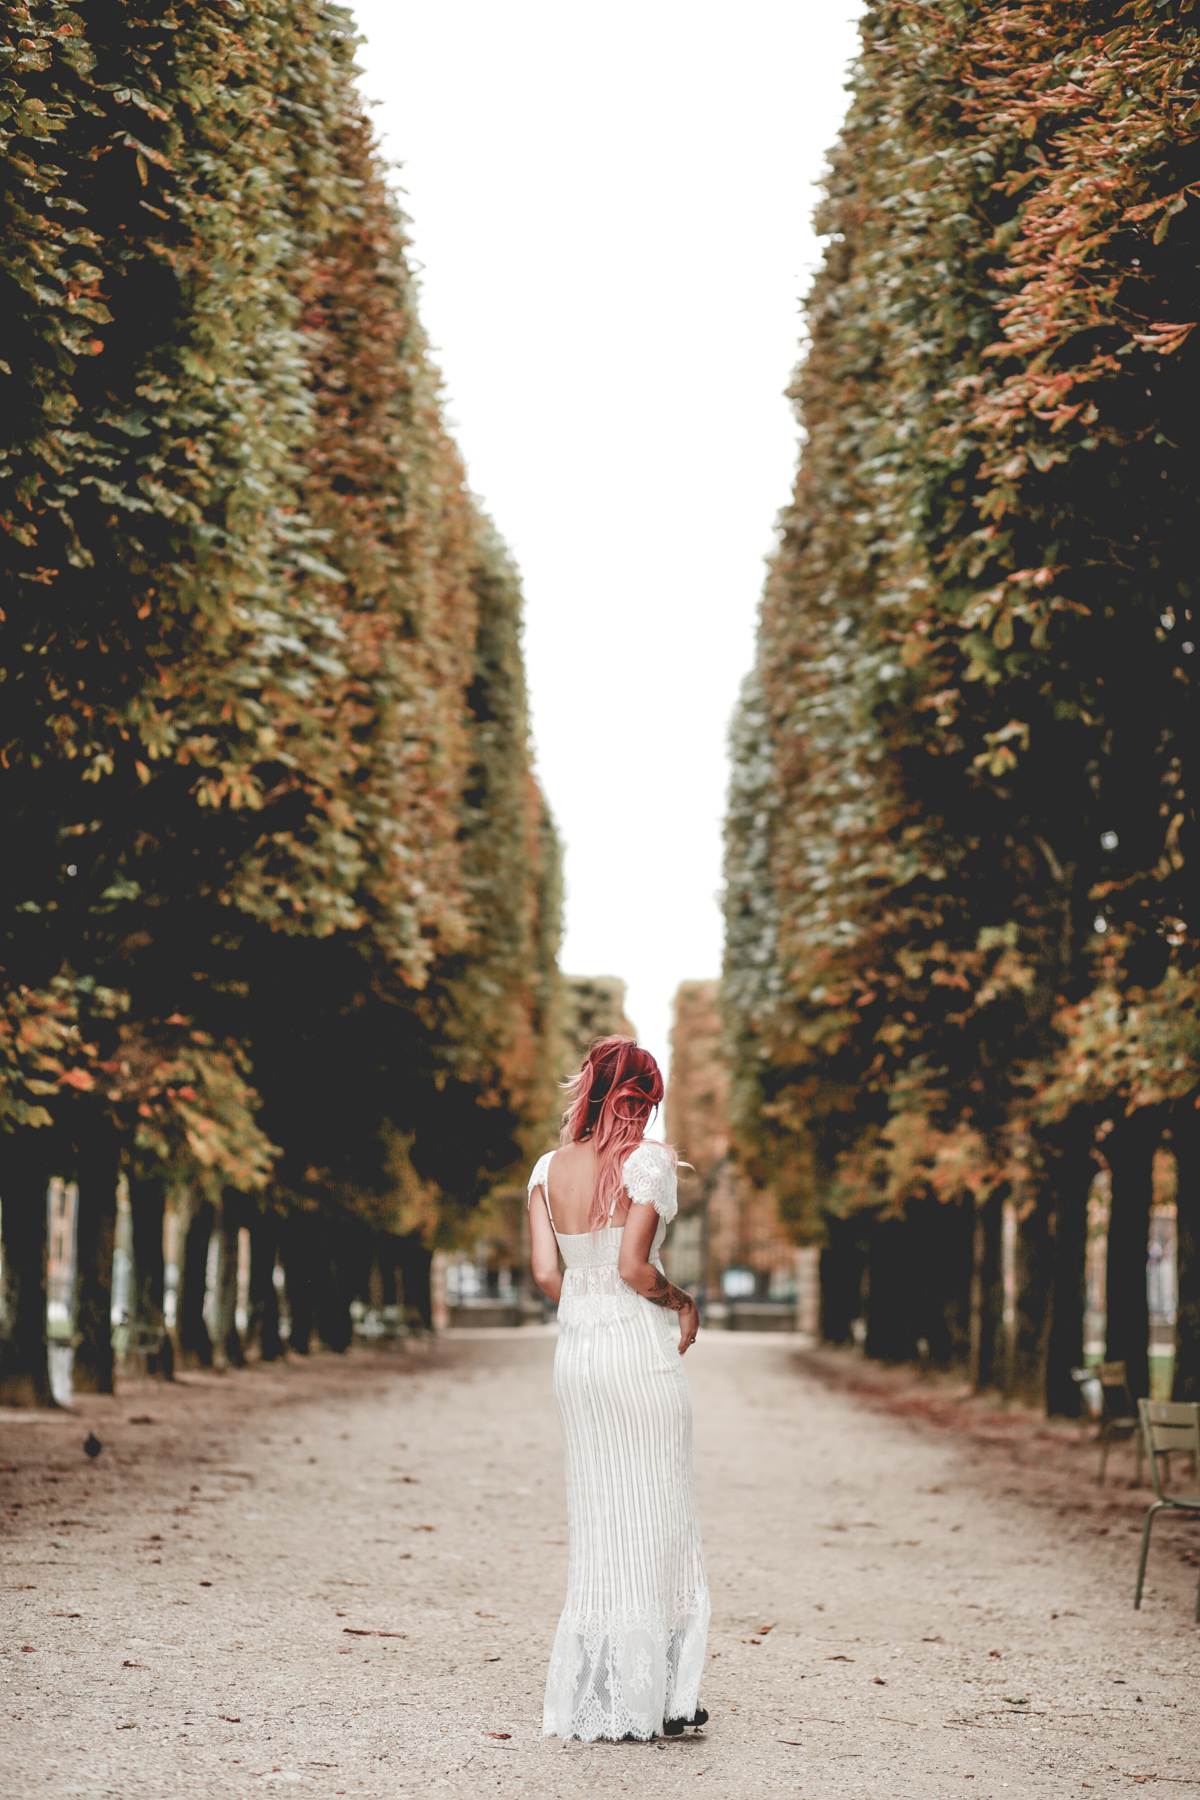 Luanna of Le Happy wearing a Stone Cold Fox Dress at the Luxembourg Gardens